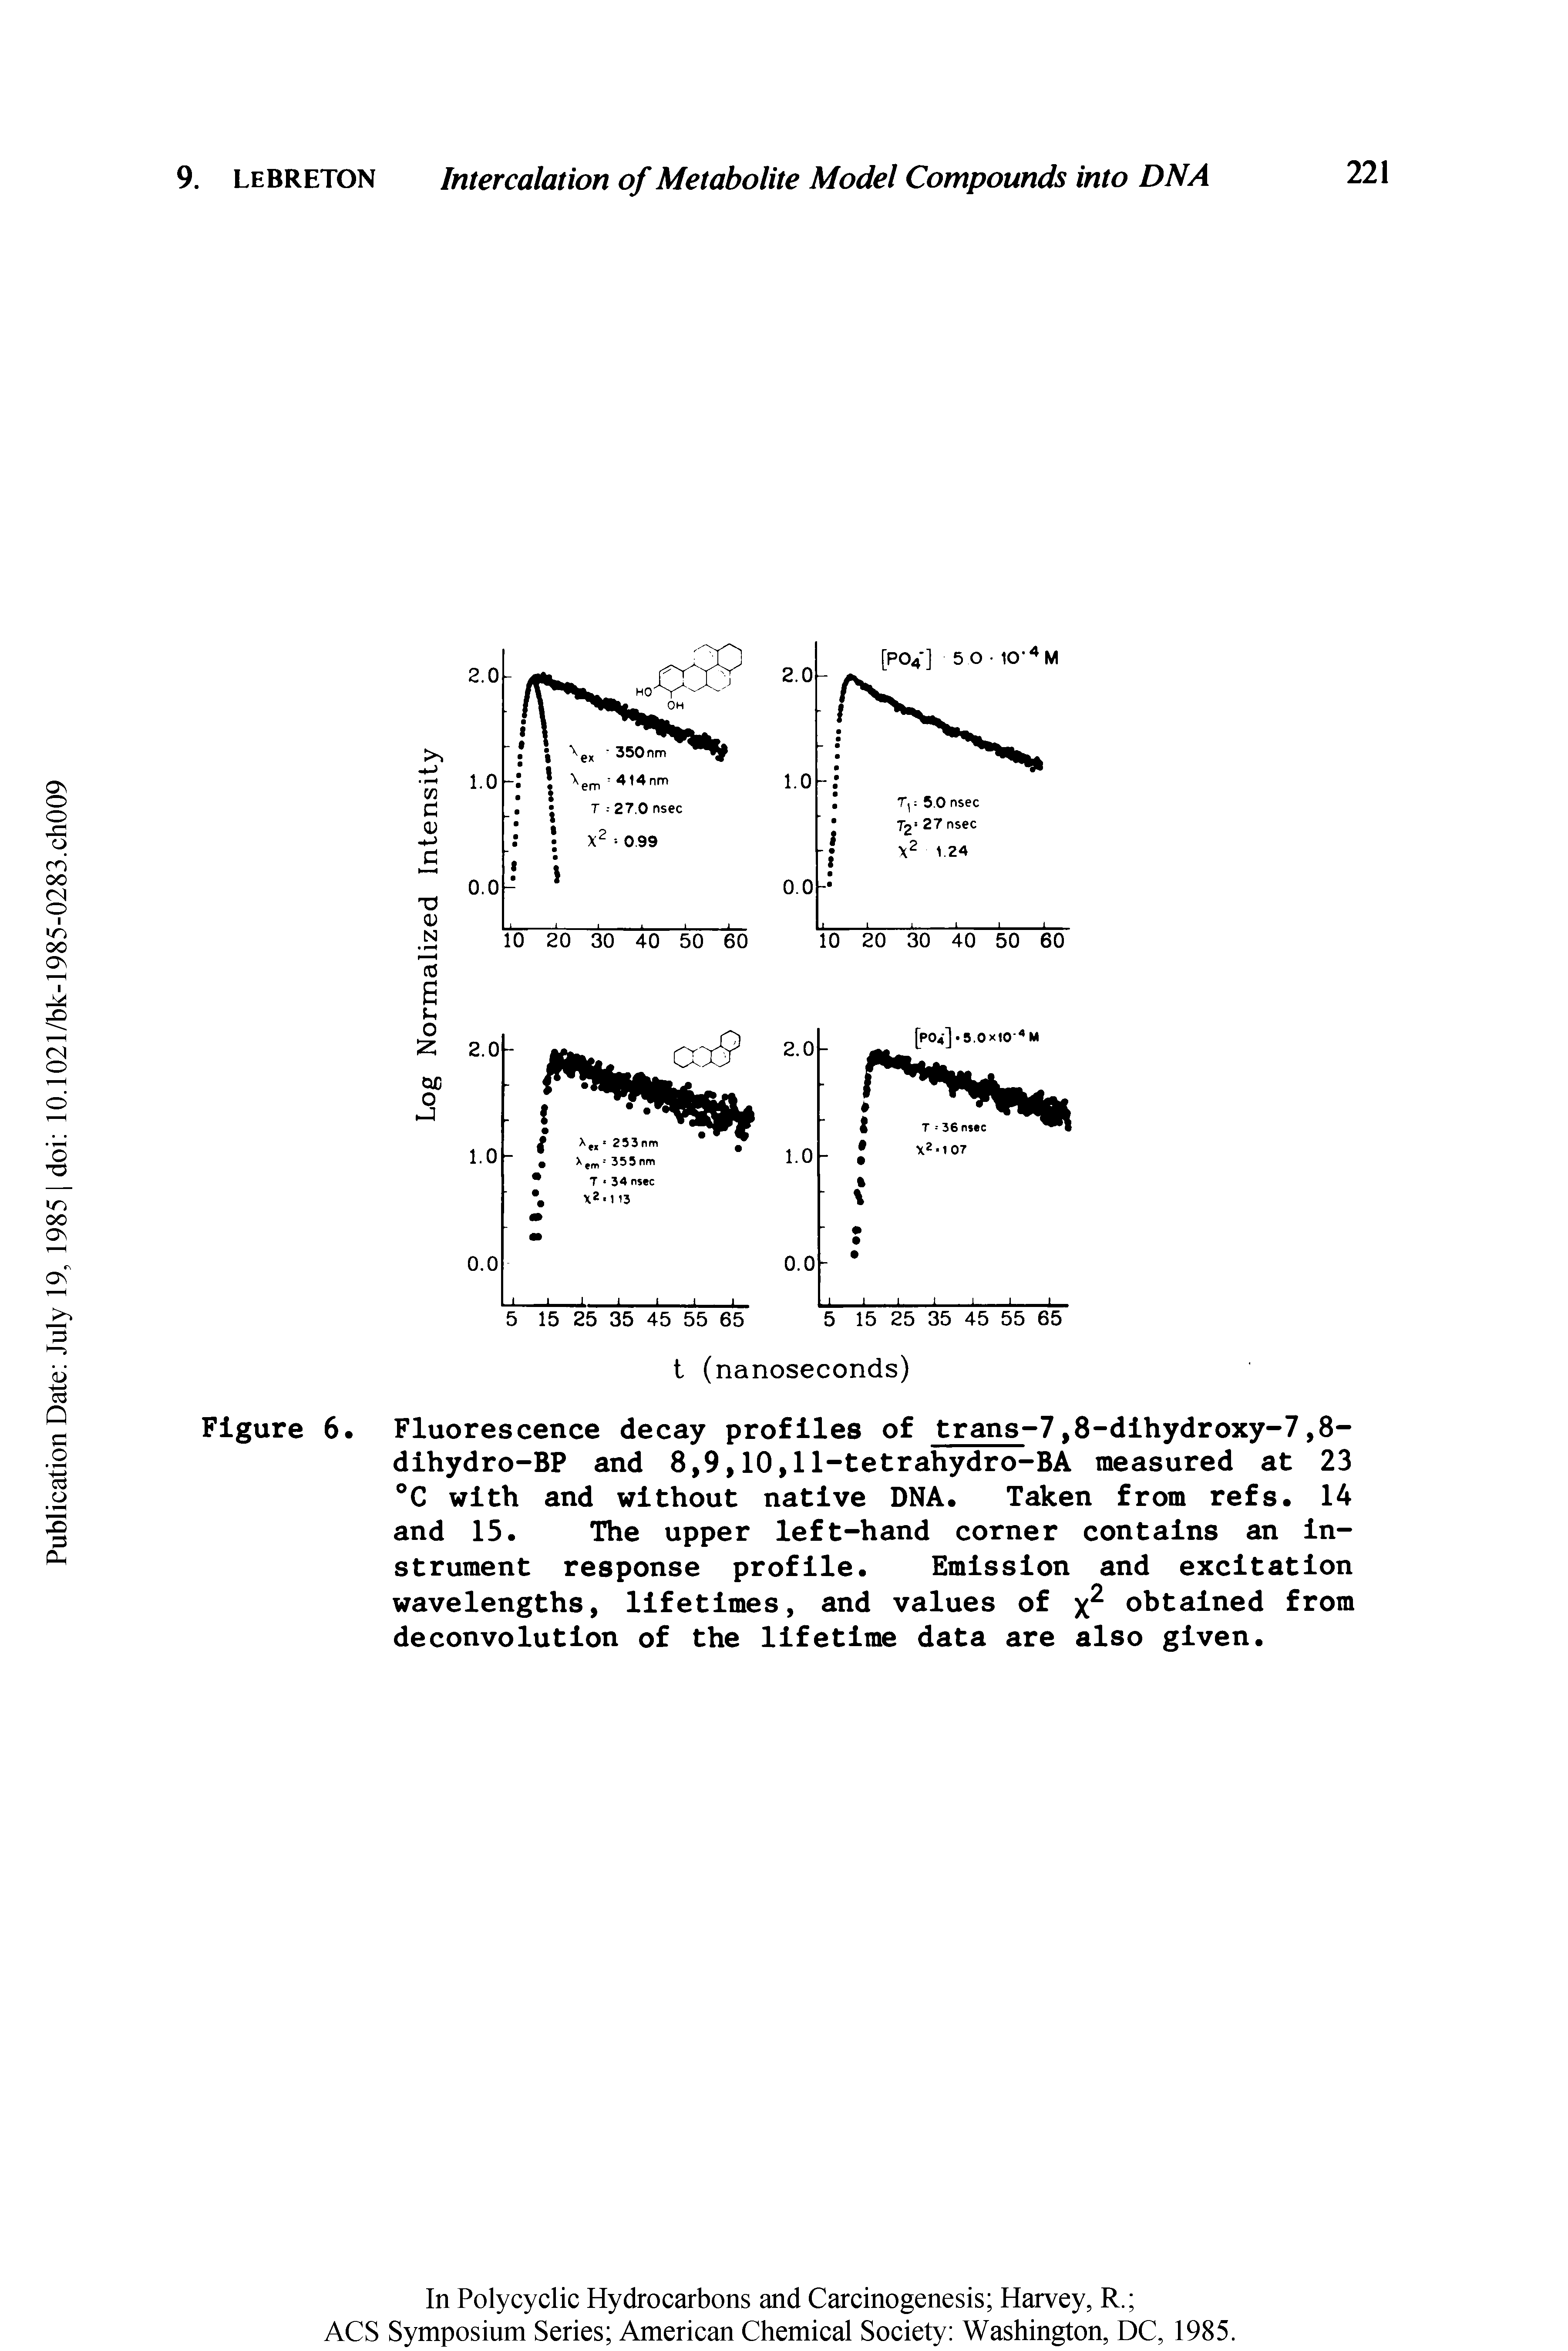 Figure 6. Fluorescence decay profiles of trans-7,8-dihydroxy-7,8-dihydro-BP and 8,9,10,11-tetrahydro-BA measured at 23 °C with and without native DNA. Taken from refs. 14 and 15. The upper left-hand corner contains an instrument response profile. Emission and excitation wavelengths, lifetimes, and values of x2 obtained from deconvolution of the lifetime data are also given.